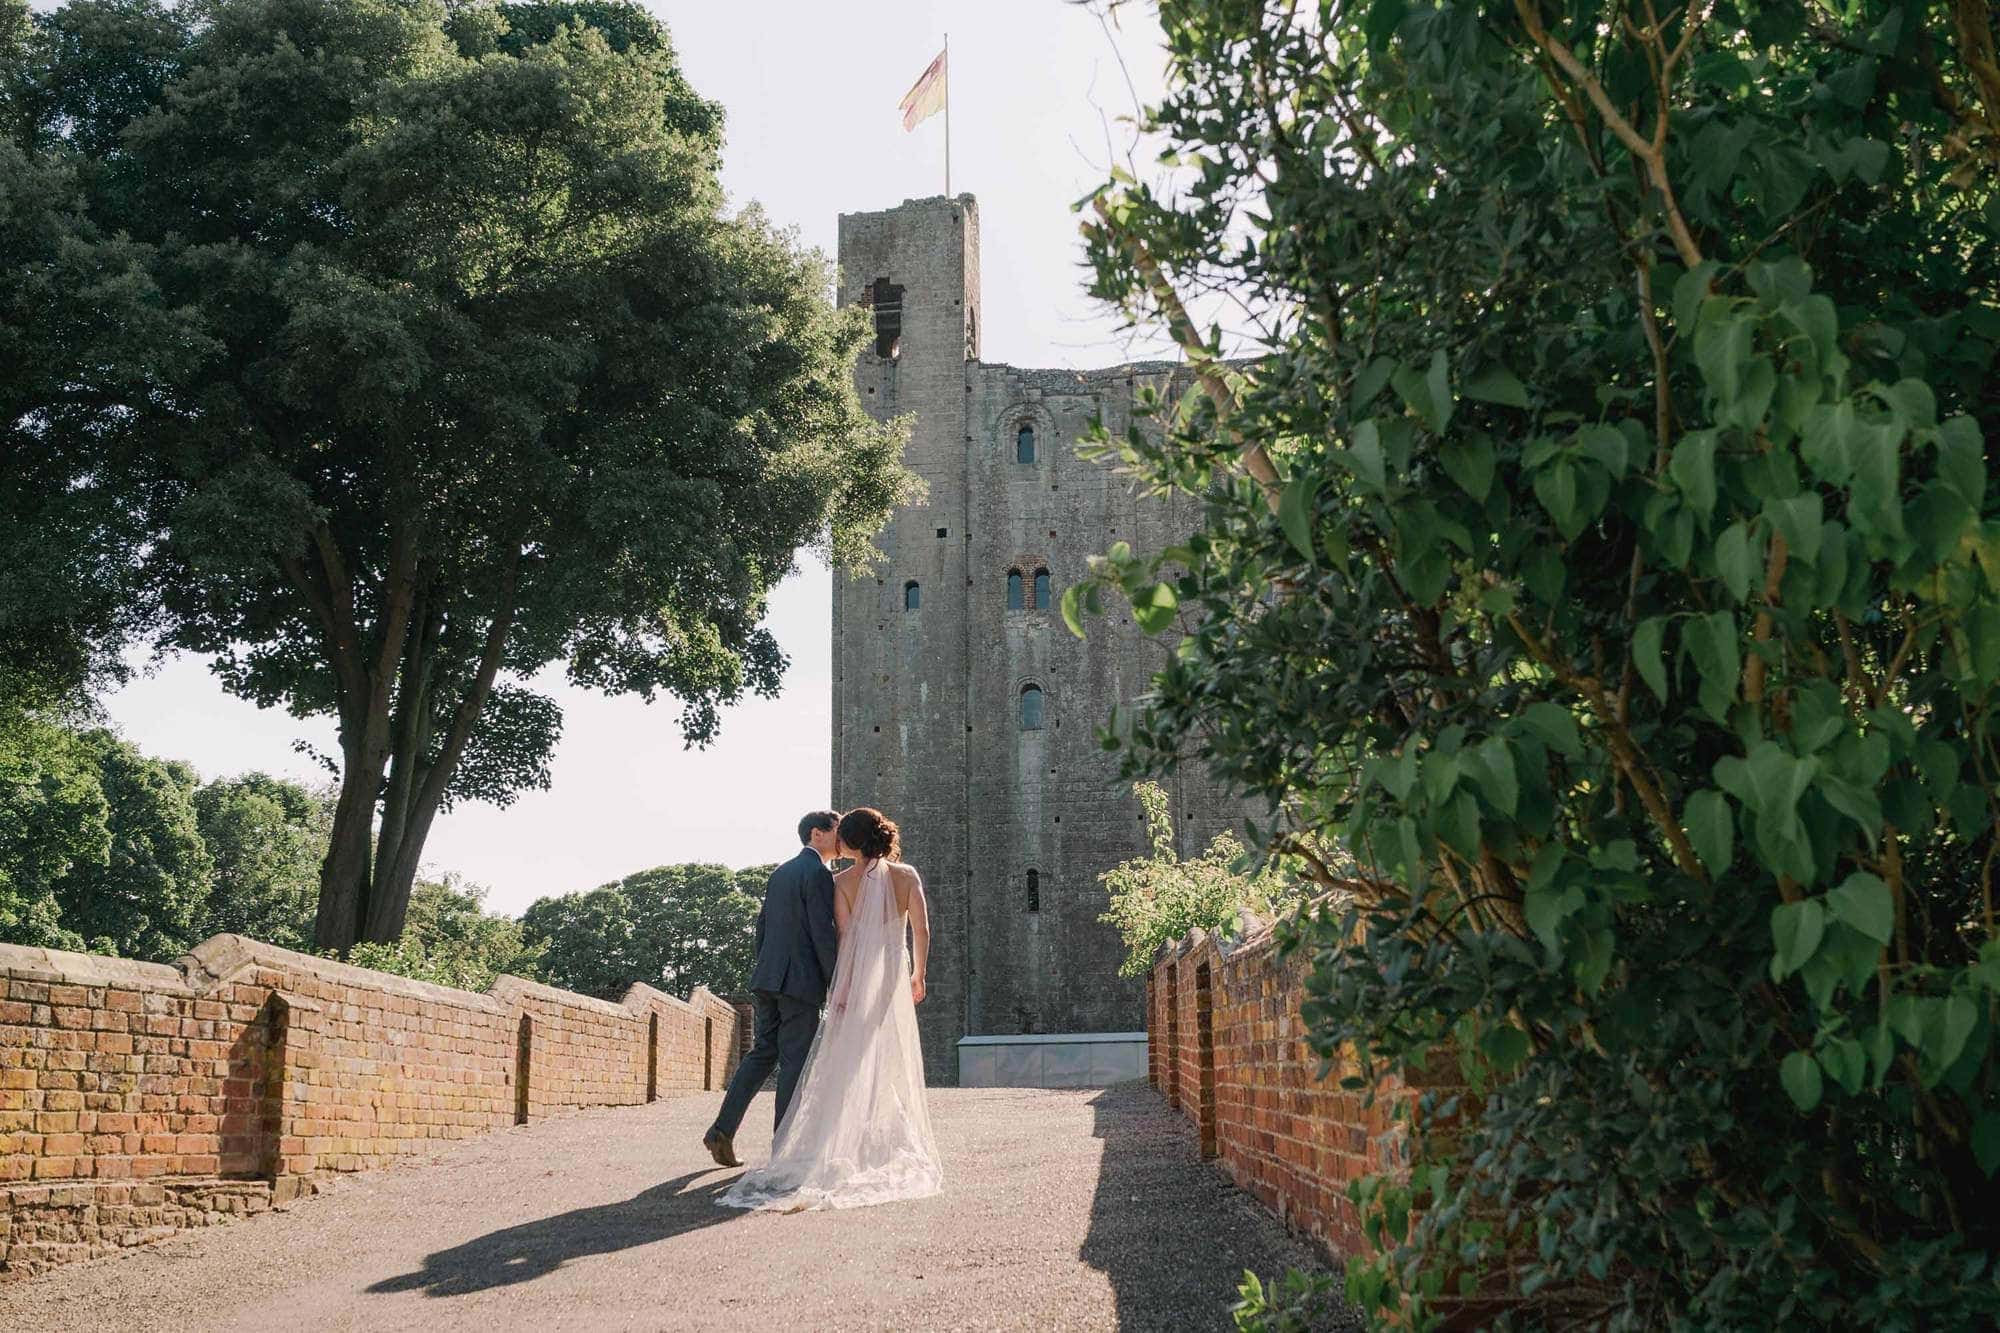 Bride and groom kiss on their wedding day at Hedingham Castle near Colchester in Essex.